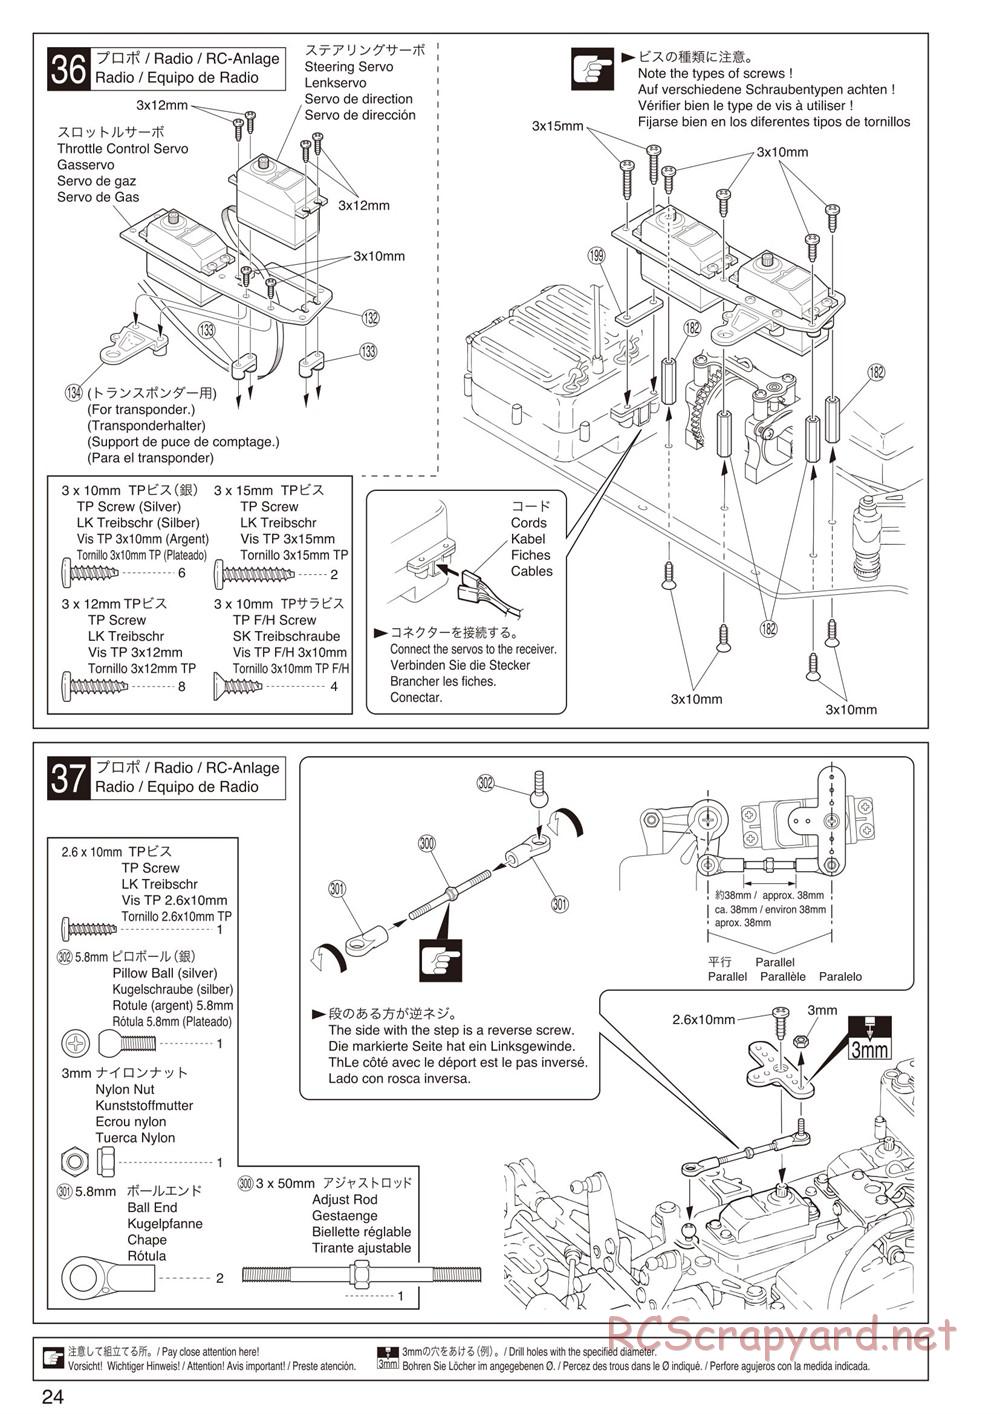 Kyosho - Inferno Neo ST - Manual - Page 24